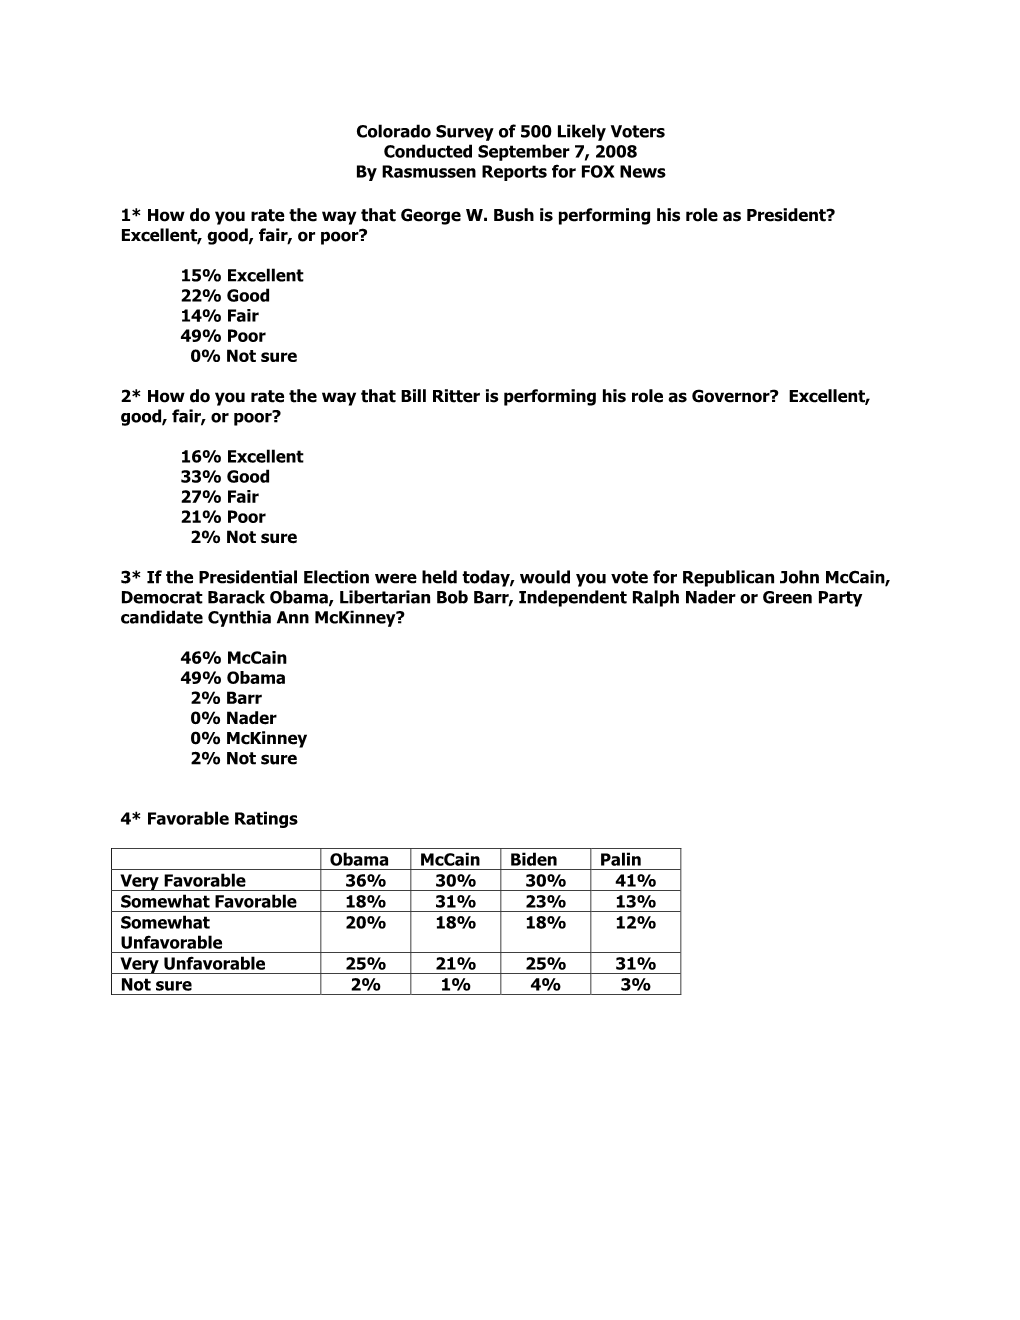 Colorado Survey of 500 Likely Voters Conducted September 7, 2008 by Rasmussen Reports for FOX News